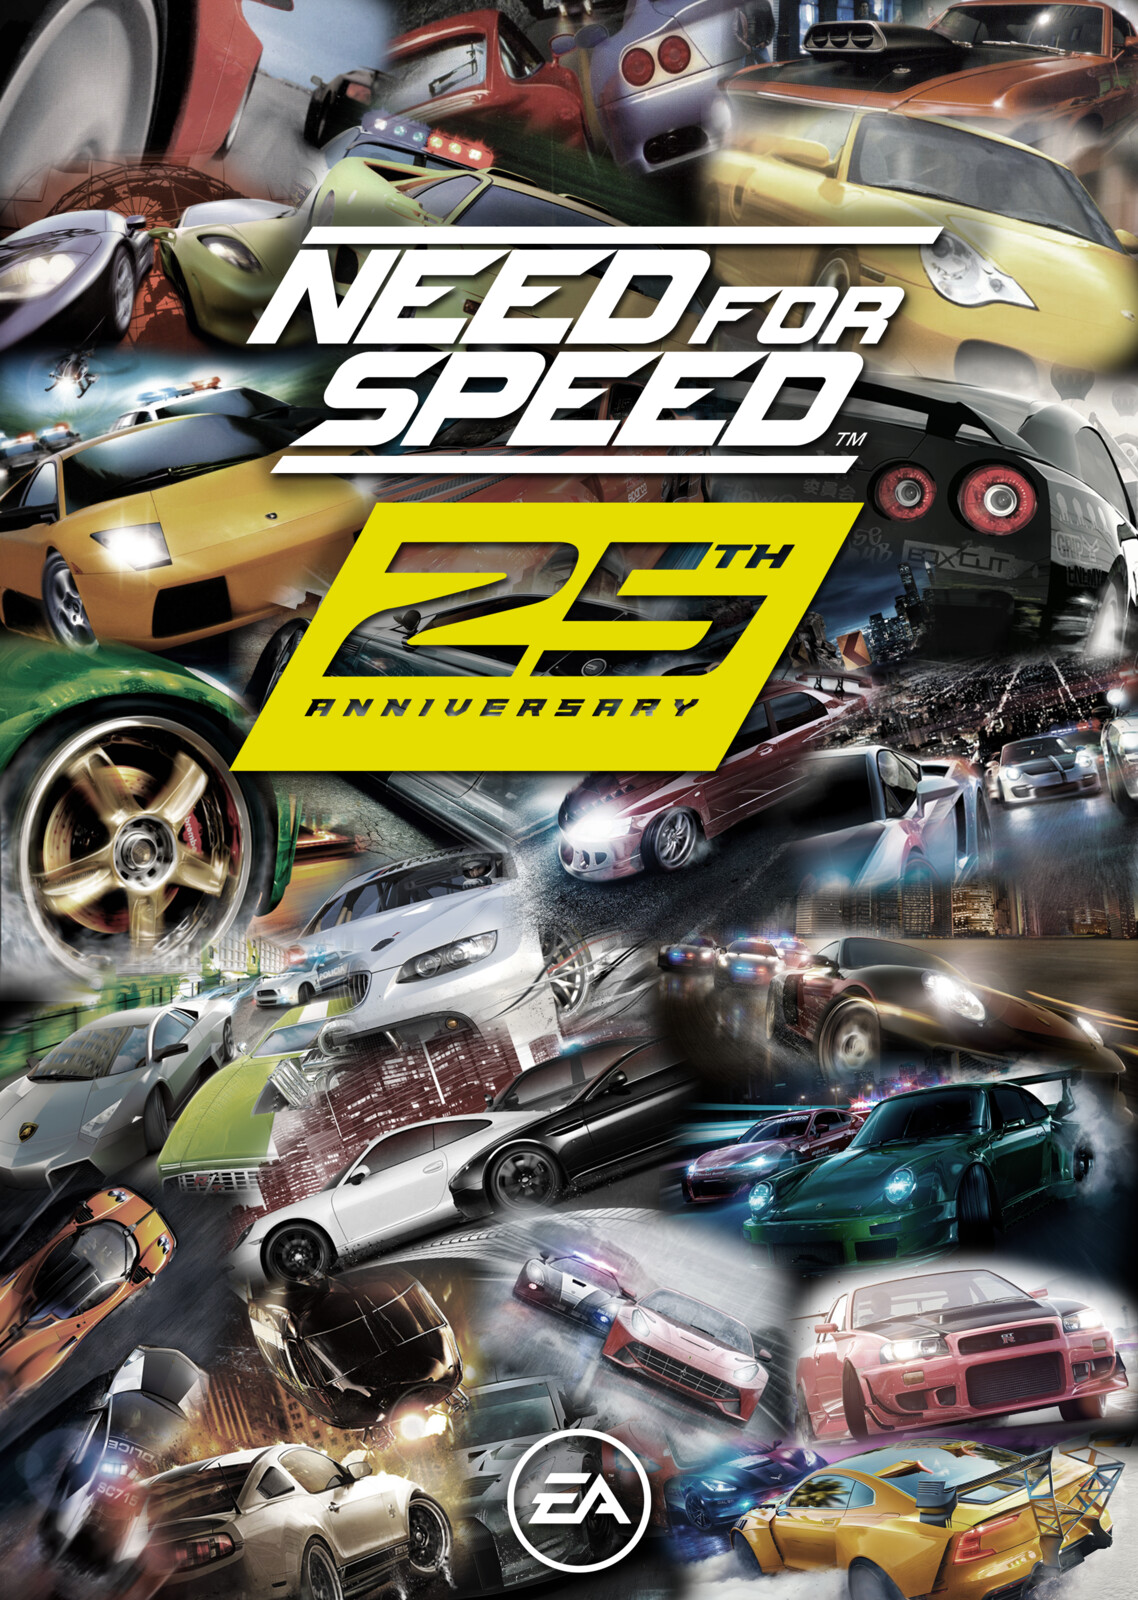 Need for Speed 25th Anniversary Booklet (Concept Cover)